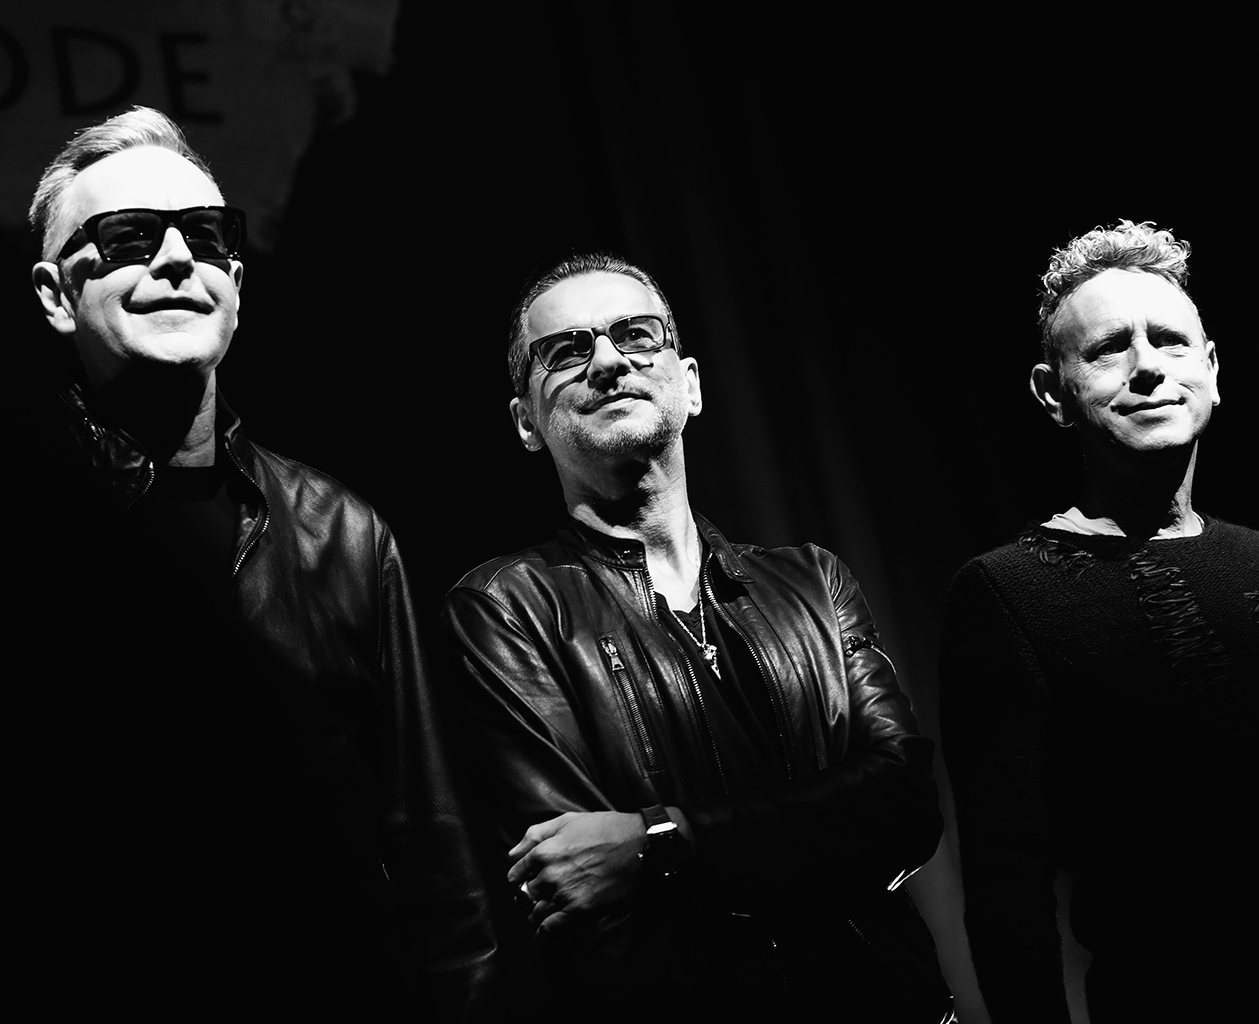 MILAN, ITALY - OCTOBER 11:  (EDITORS NOTE: Image has been converted to black and white.) Depeche Mode attend a photocall to launch the Global Spirit Tour on October 11, 2016 in Milan, Italy.  (Photo by Vittorio Zunino Celotto/Getty Images)